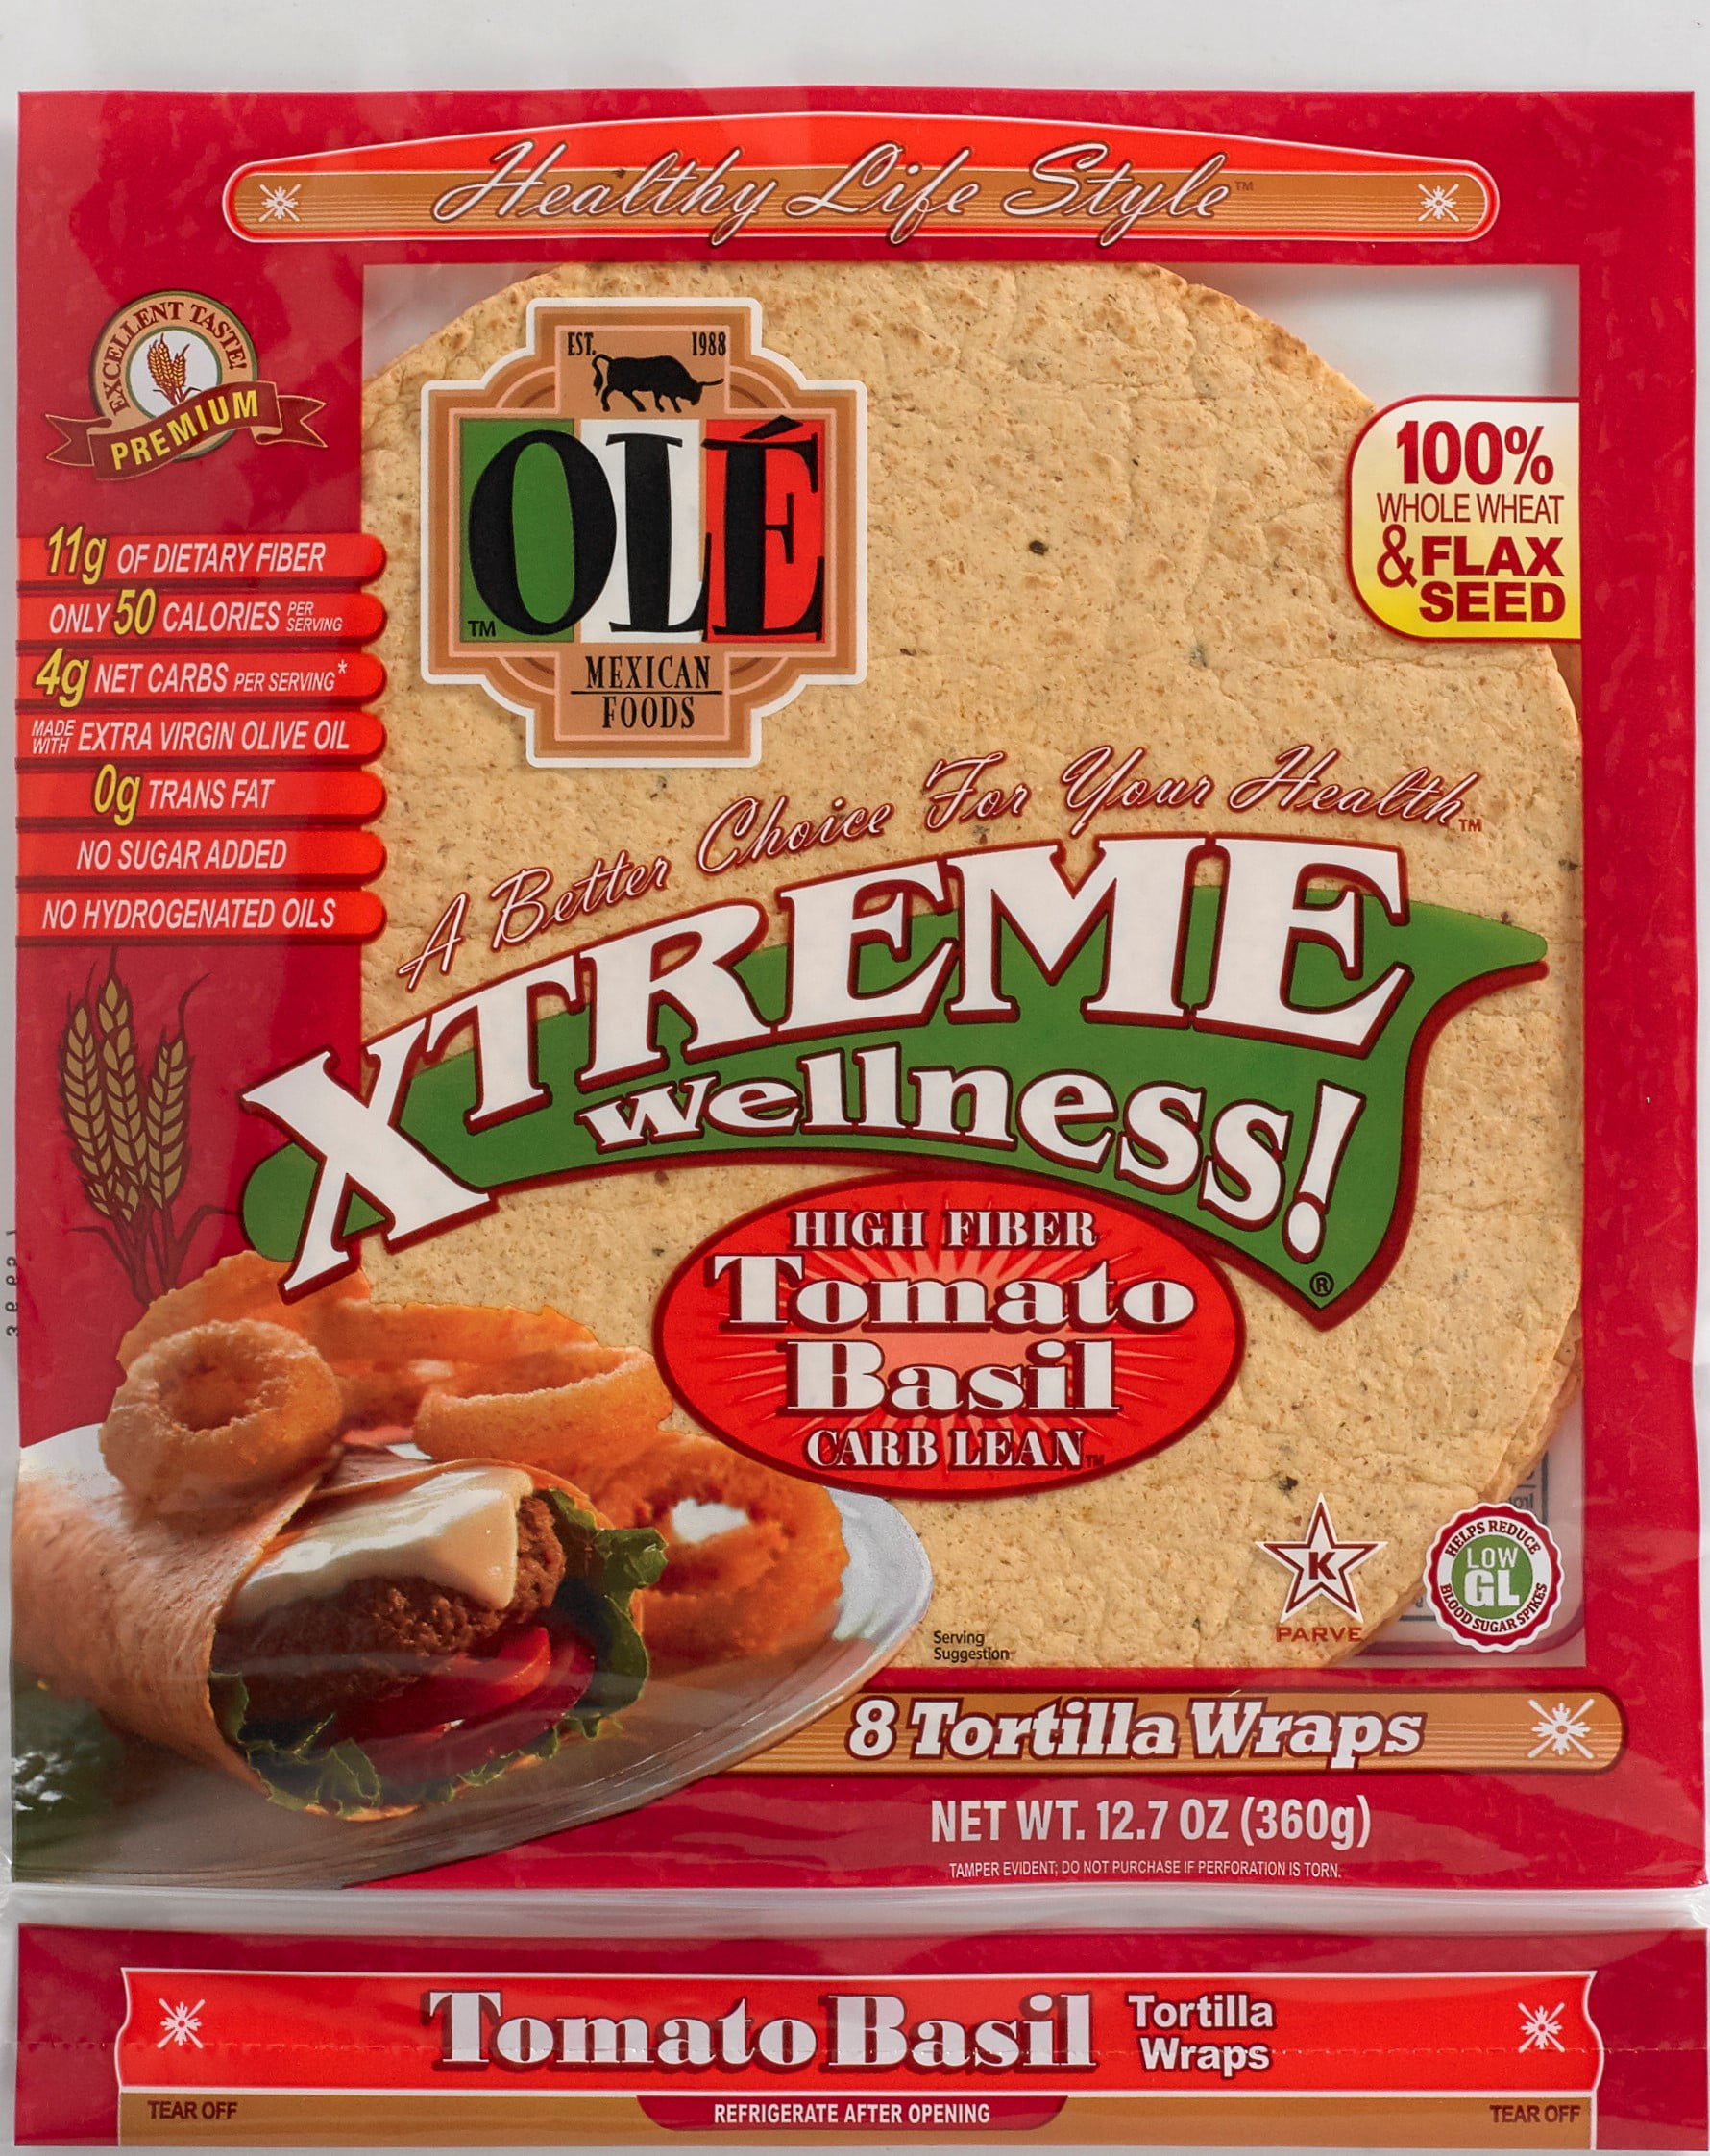 Ol Mexican Foods Xtreme Wellness! Tomato Basil Tortilla Wraps, 8 count, 12.7 oz